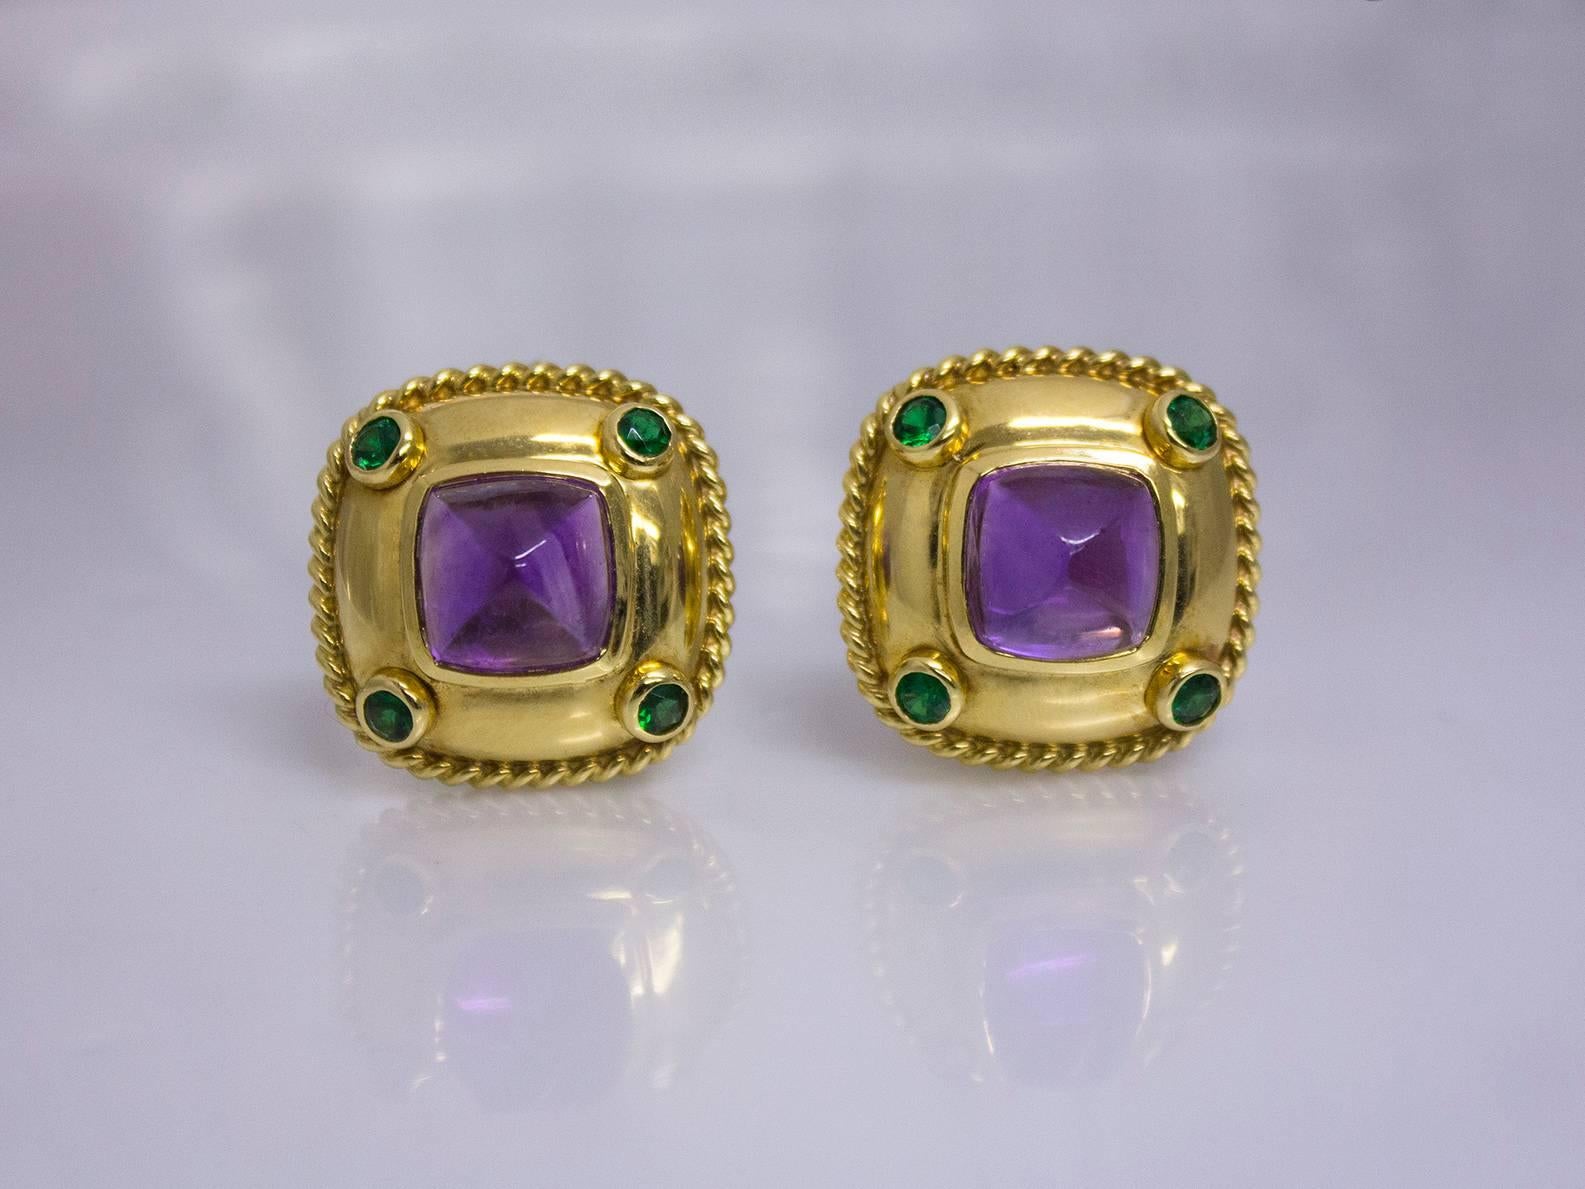 Features 2 sugarloaf cabochon amethysts, weighing 15.50 carats total bezel set in 18K yellow gold and accented by 8 round peridots, weighing 1.00 carat total. By request we can add posts to these ear clips and convert them into earrings.